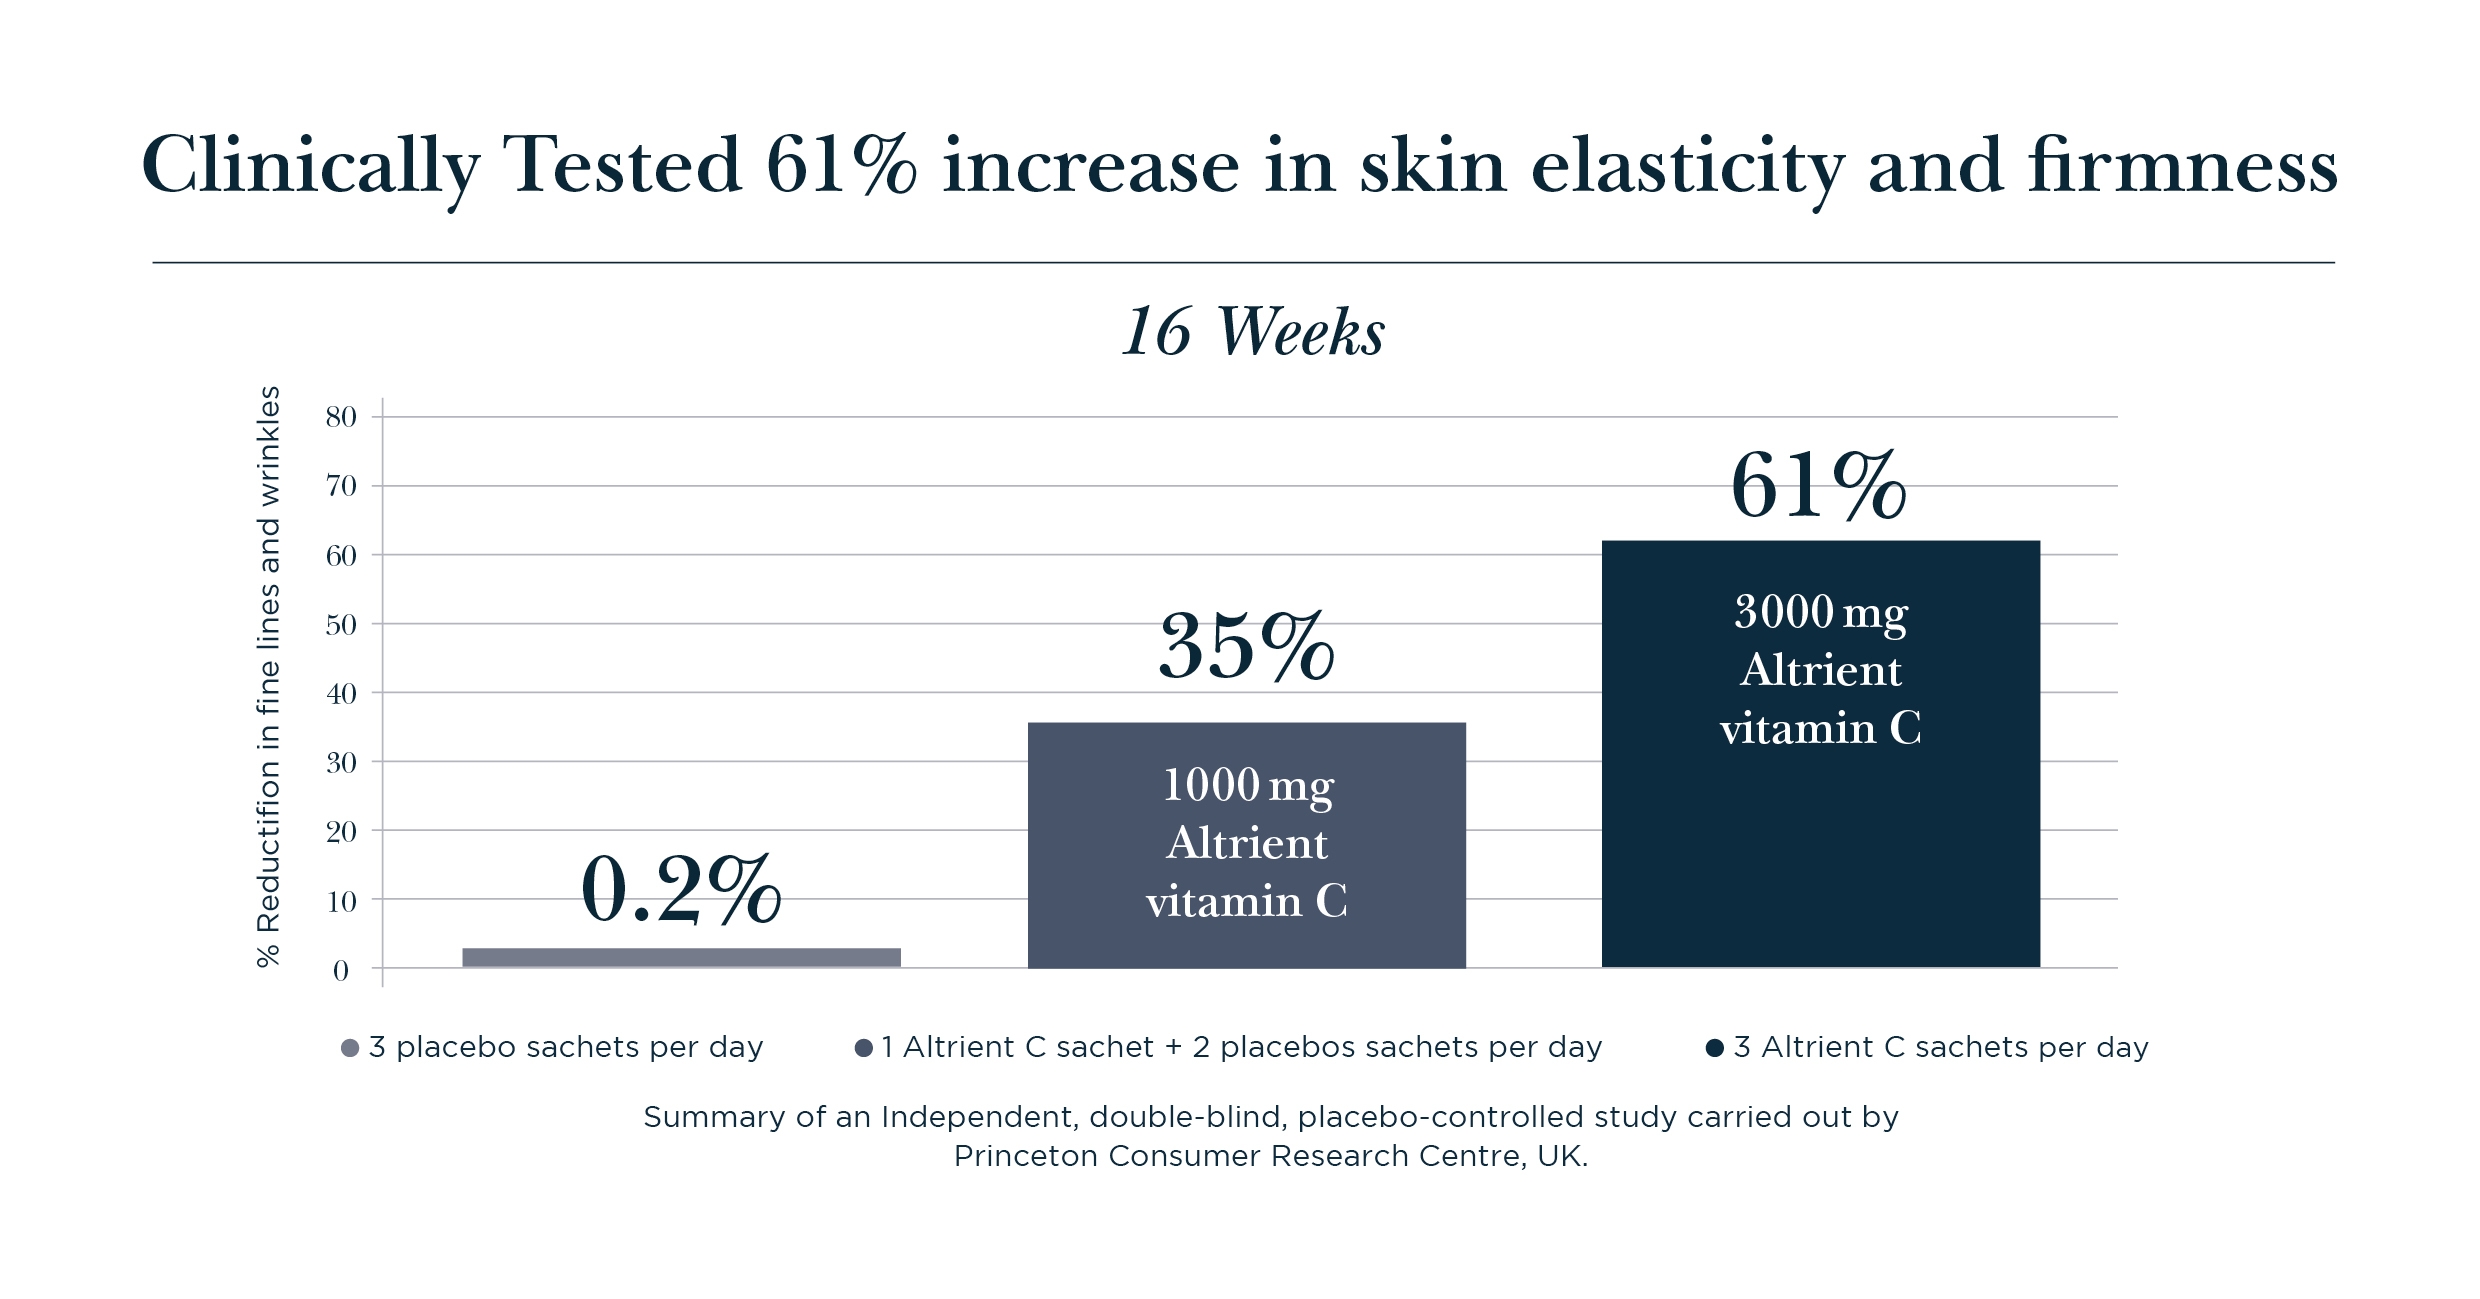 Altrient C Clinical study demonstrates a 61% increase in skin elasticity